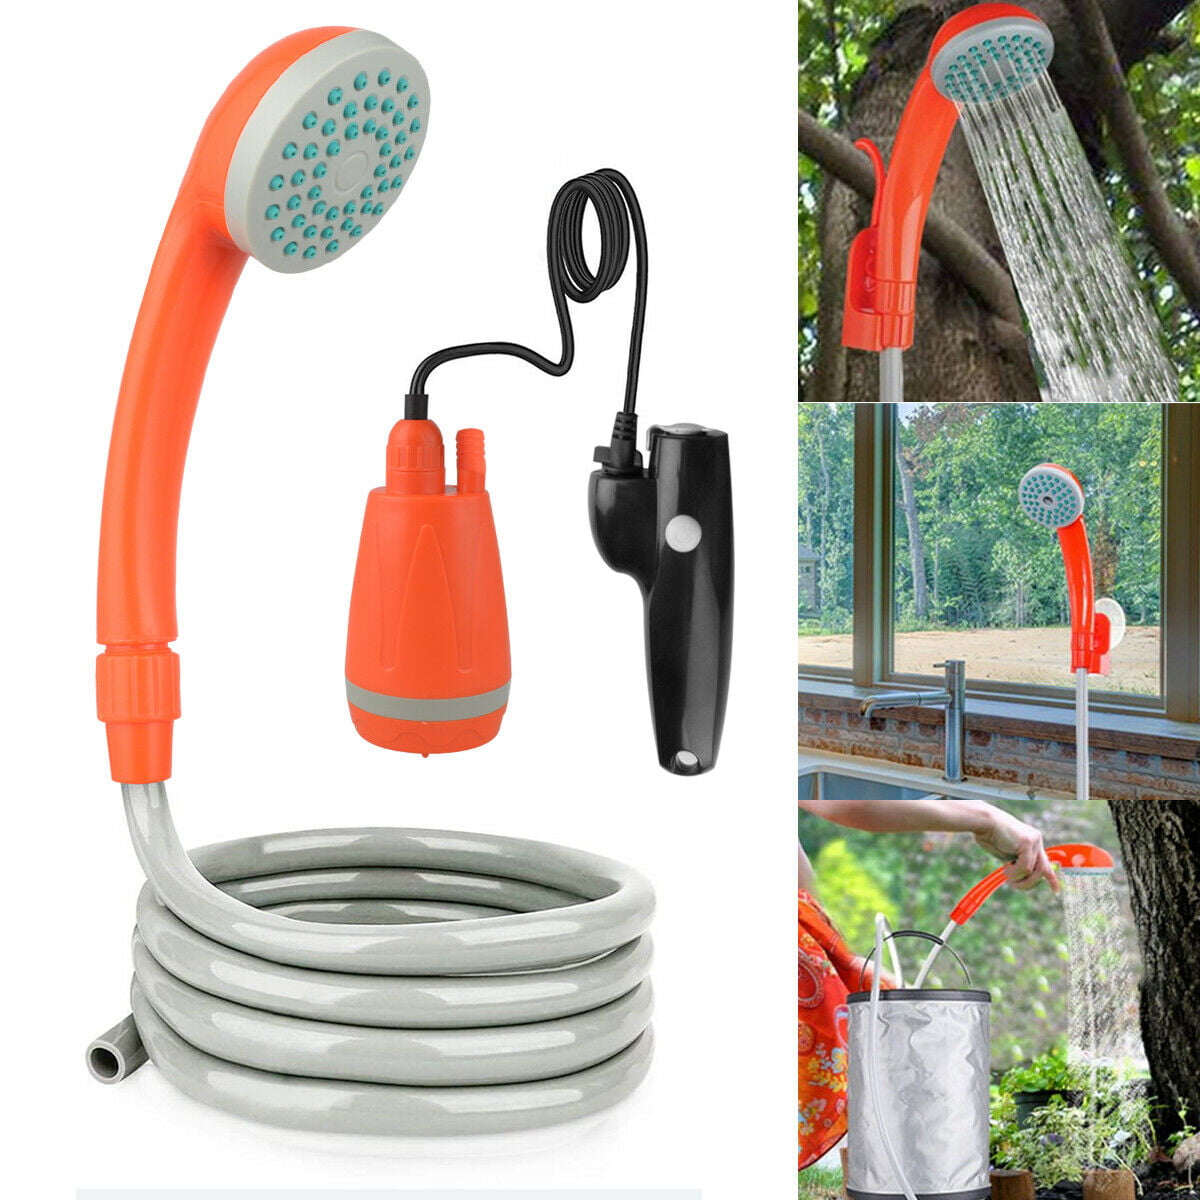 Portable Outdoor Shower Head Camping Bath Supplies Sprinkler N7D2 S6I2 